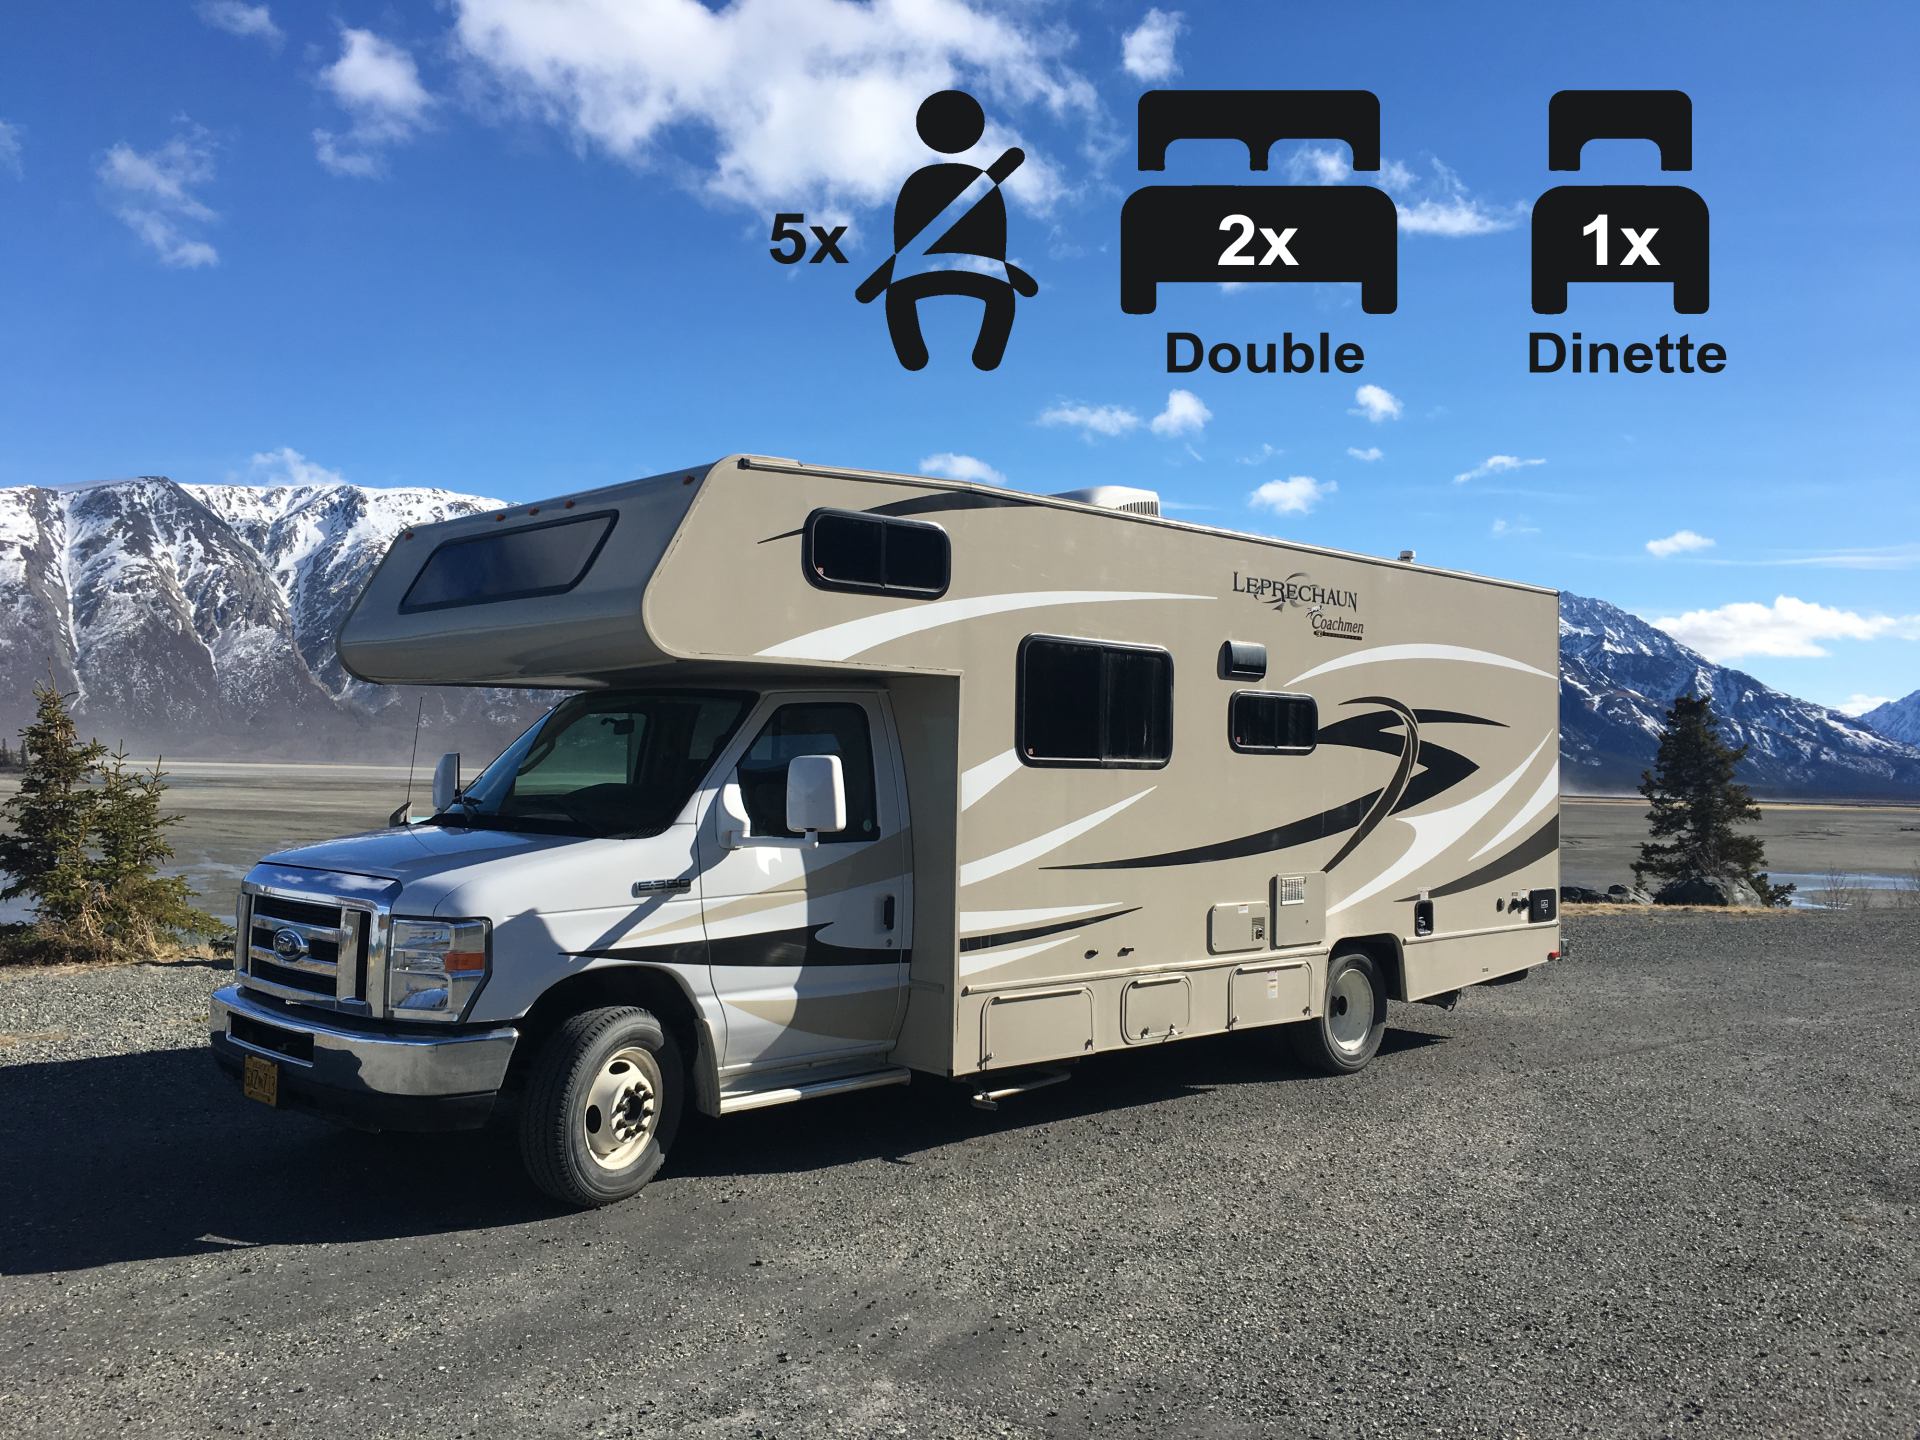 A motorhome on a gravel lot with a mountain range in the background and icons that indicate the amount of seatbelts and double and dinette beds available